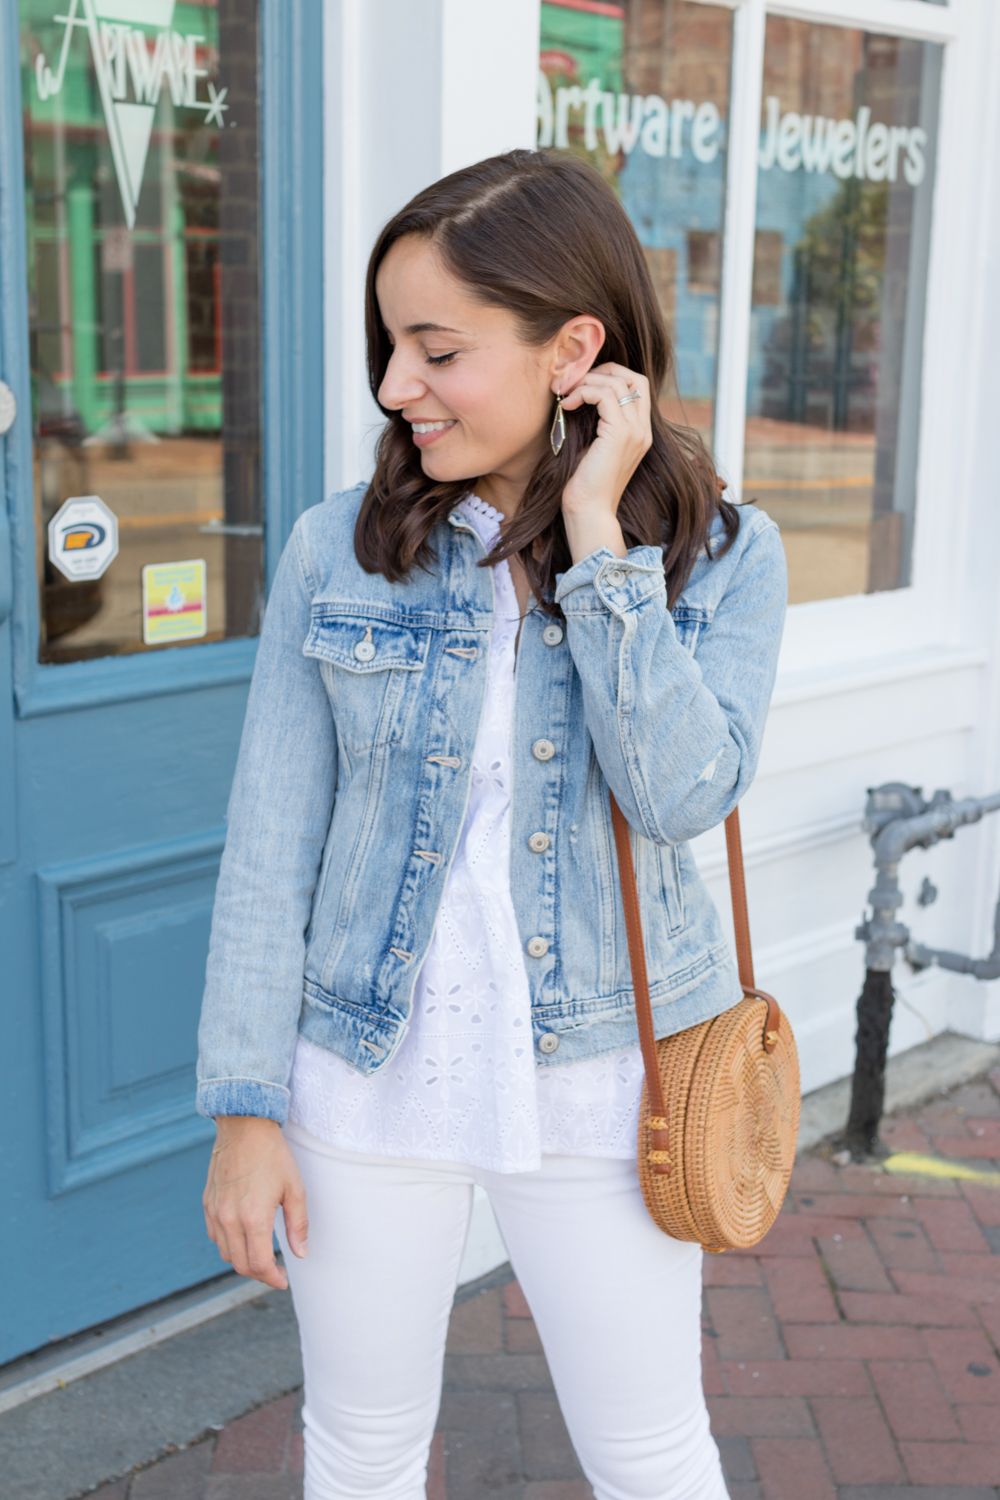 How To Wear White Denim When You're Pear Shaped - Pumps & Push Ups